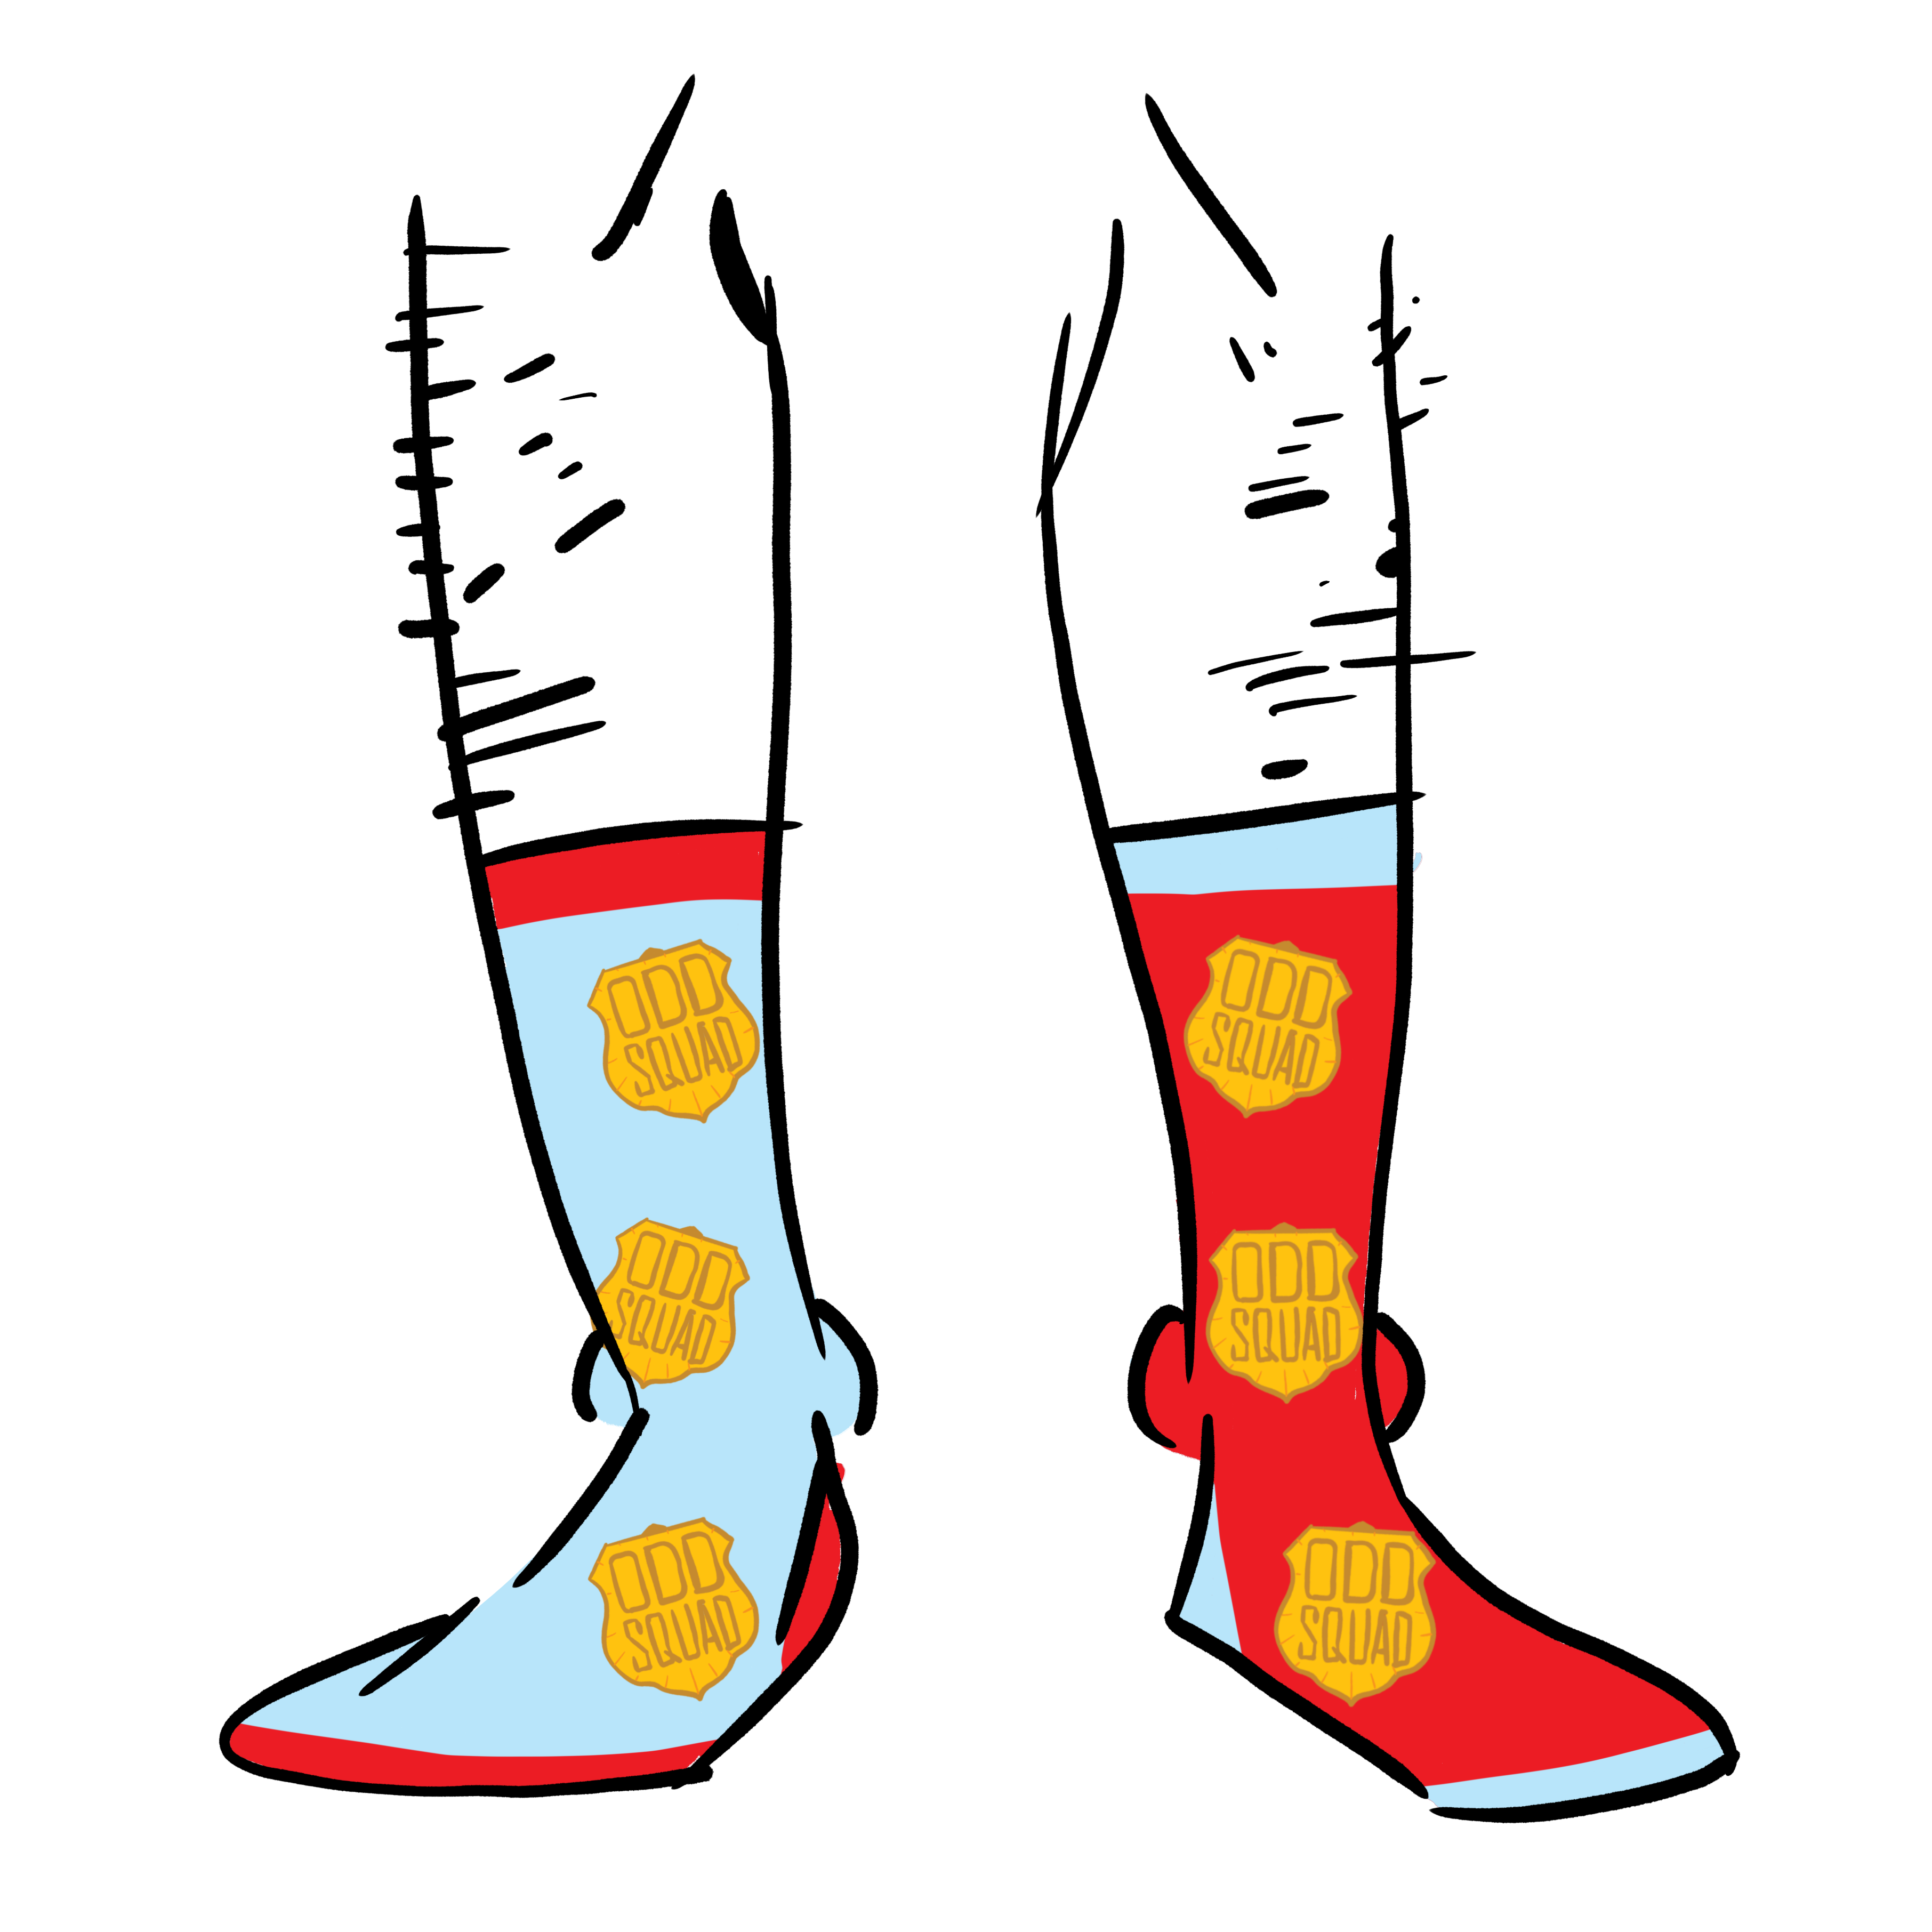 Left sock is red, the right sock is light blue. Both socks have the Odd Squad logo as a pattern.